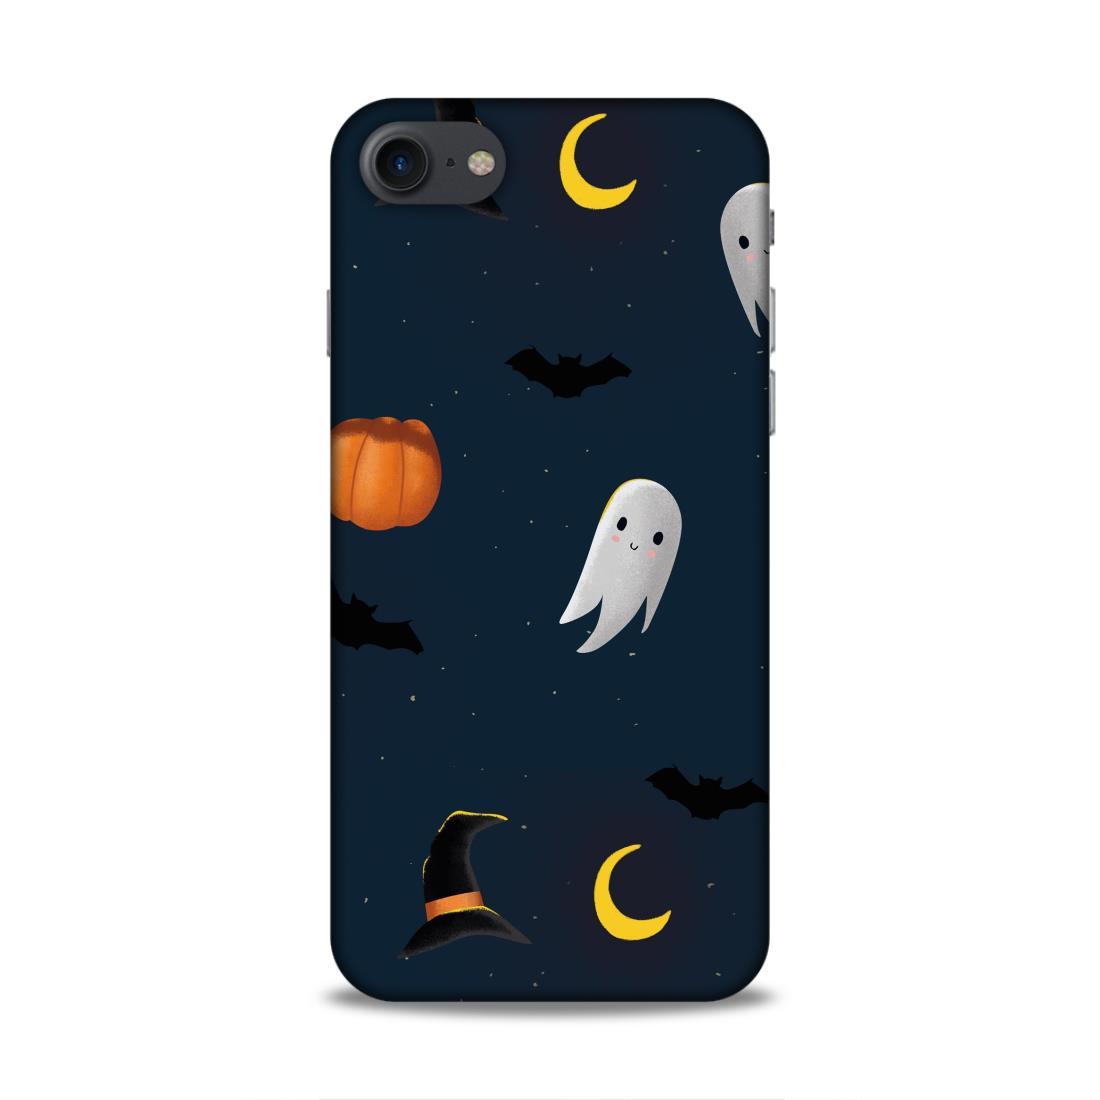 Cute Ghost iPhone 7 Mobile Case Cover